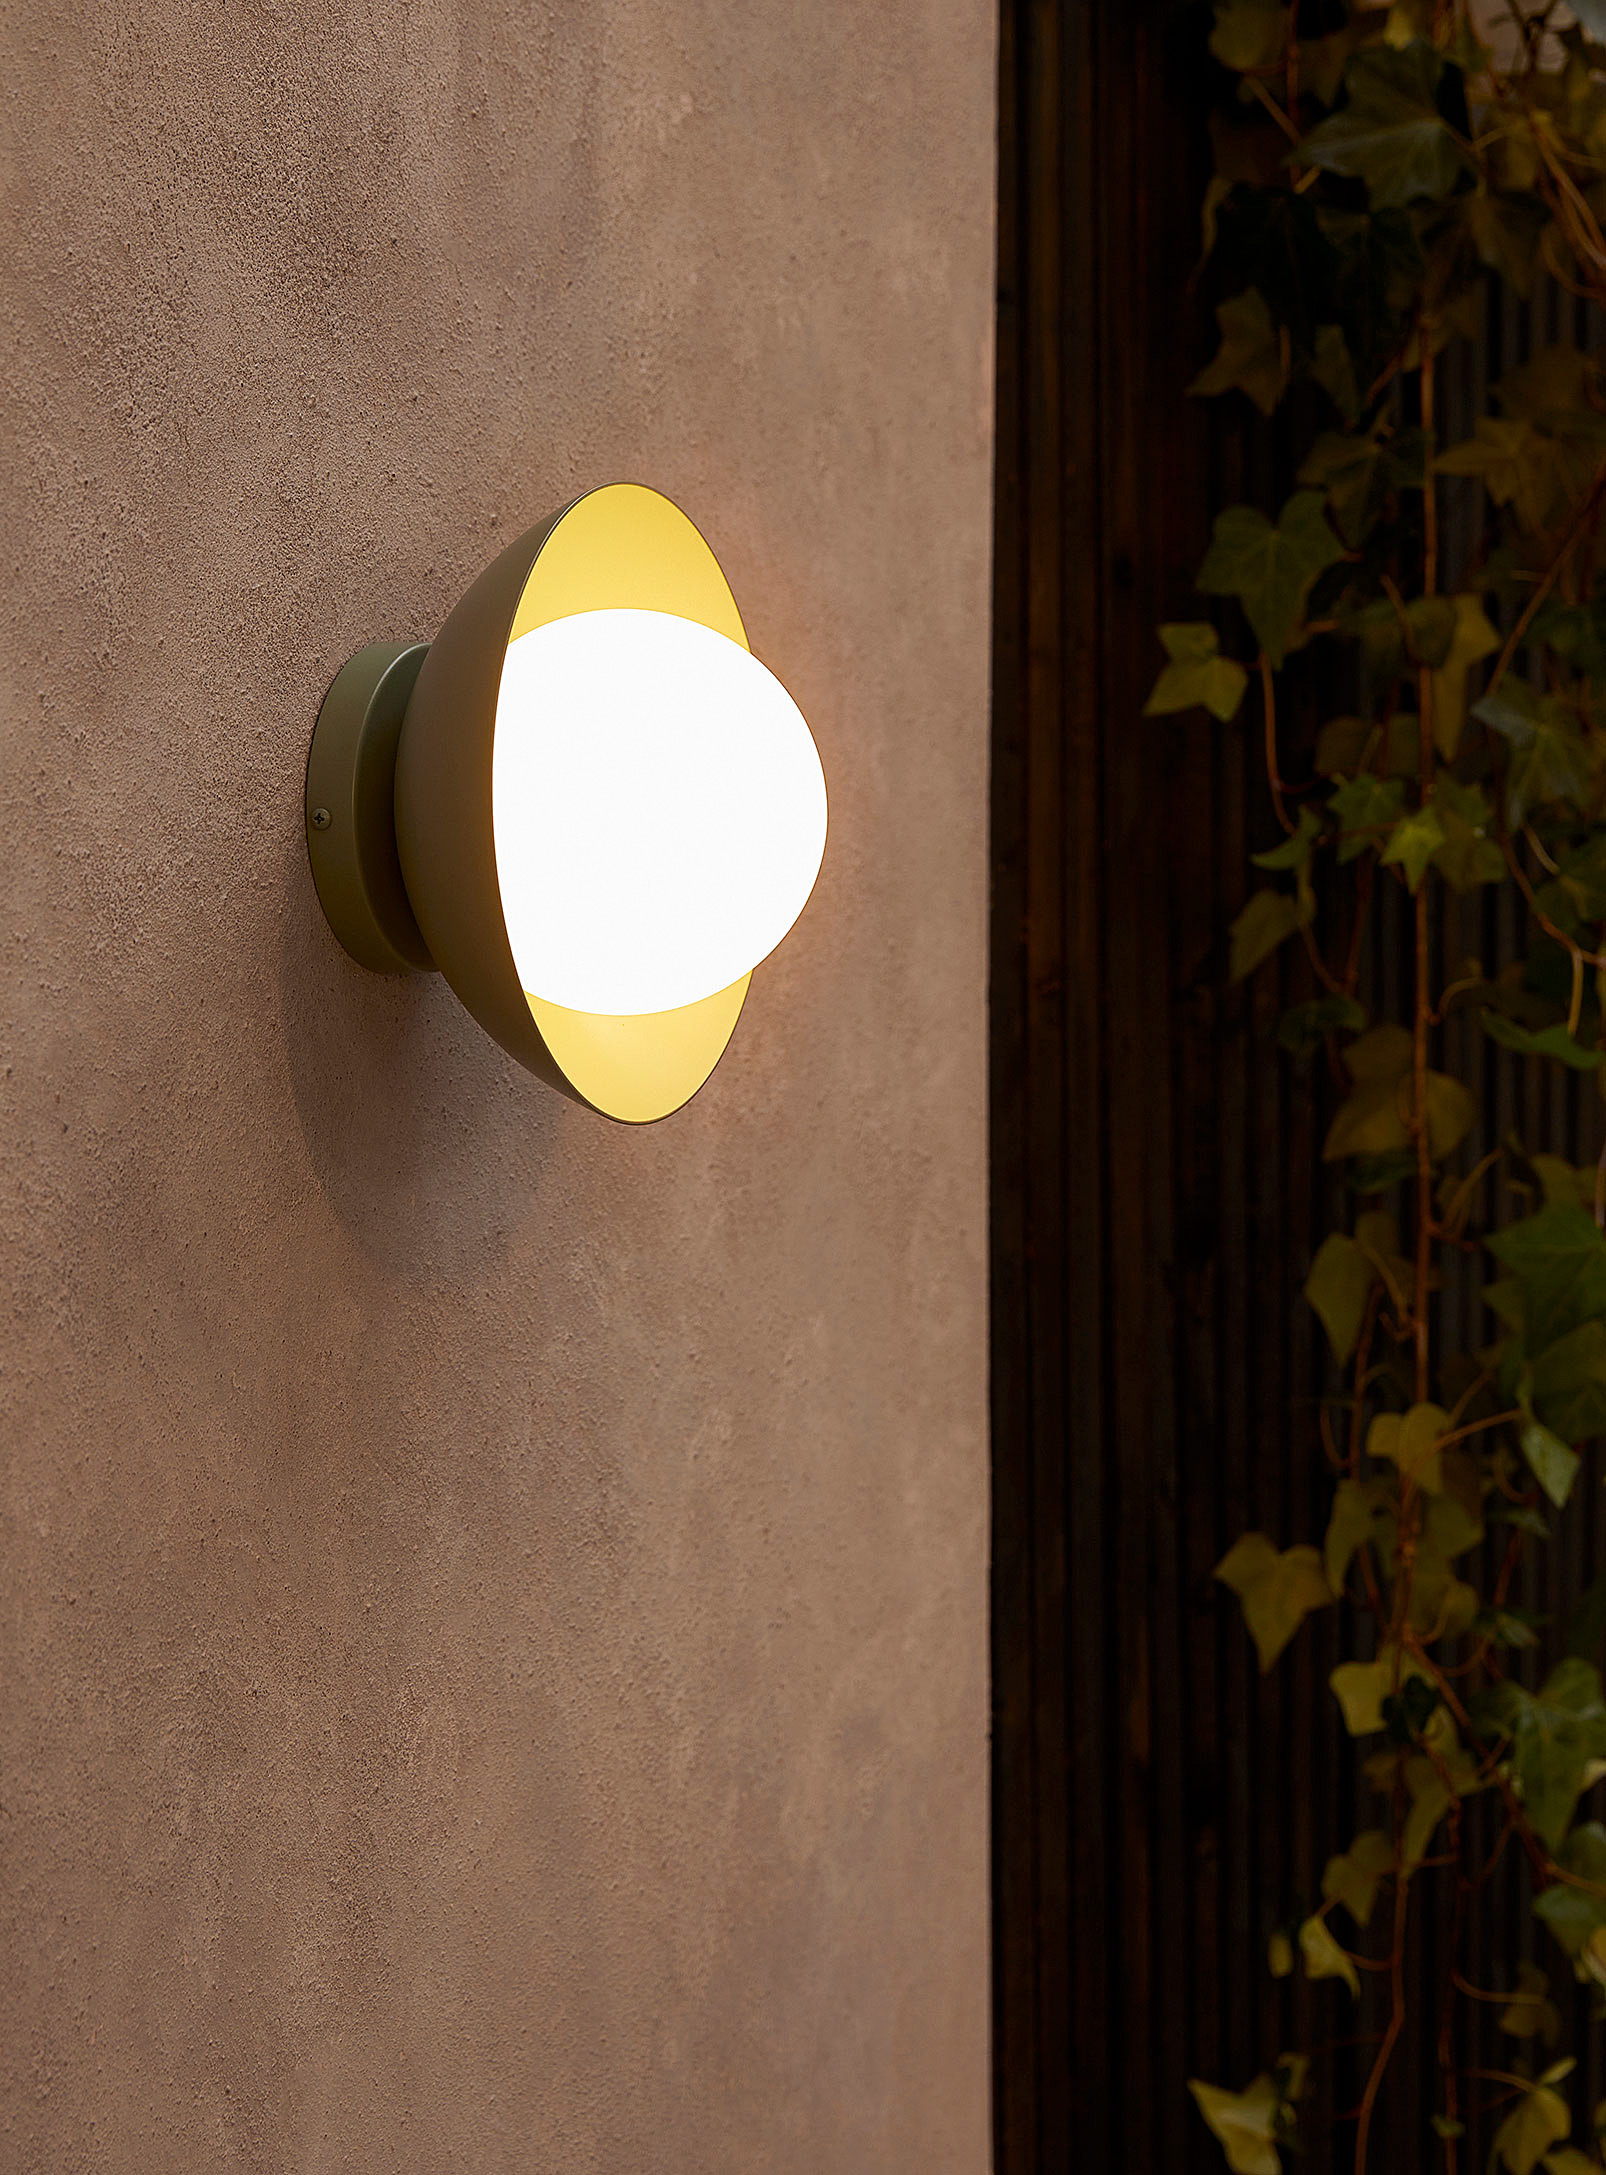 Luminaire Authentik Small Danoise Indoor And Outdoor Light Fixture In Lime Green